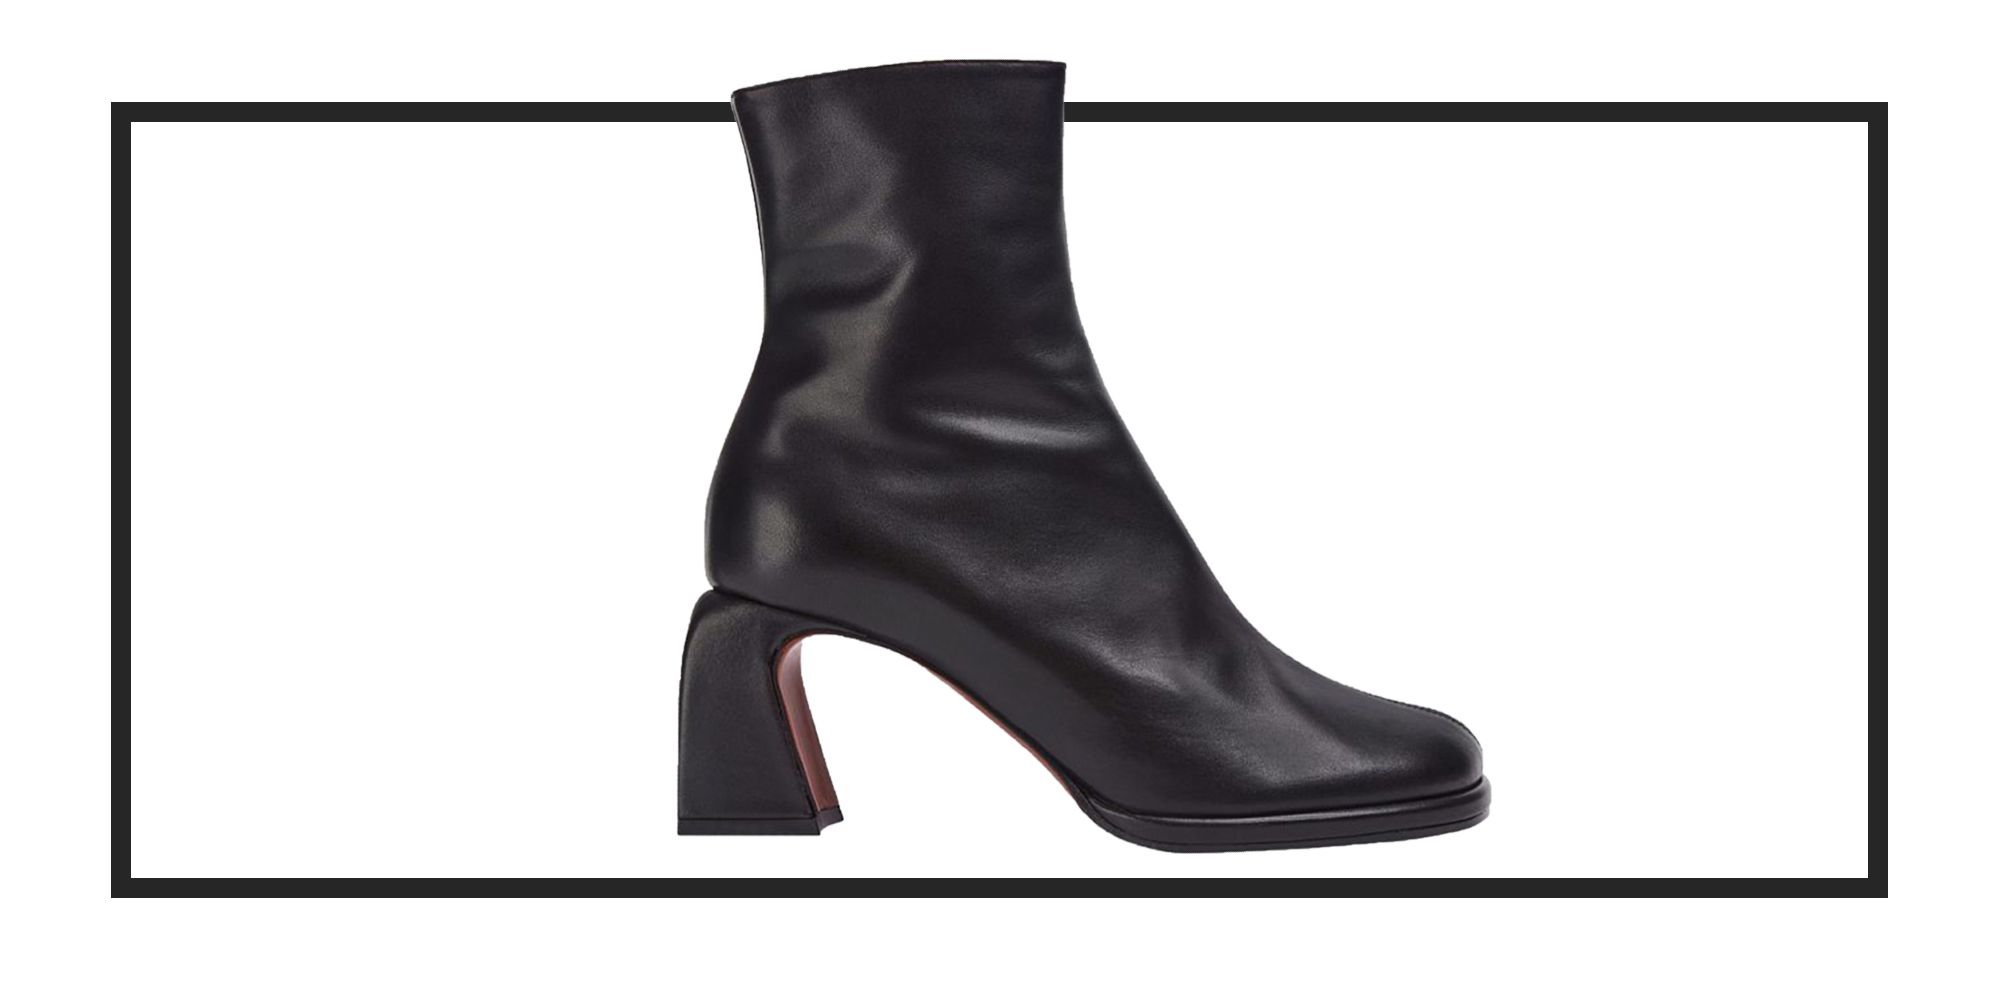 The best black boots to buy this season